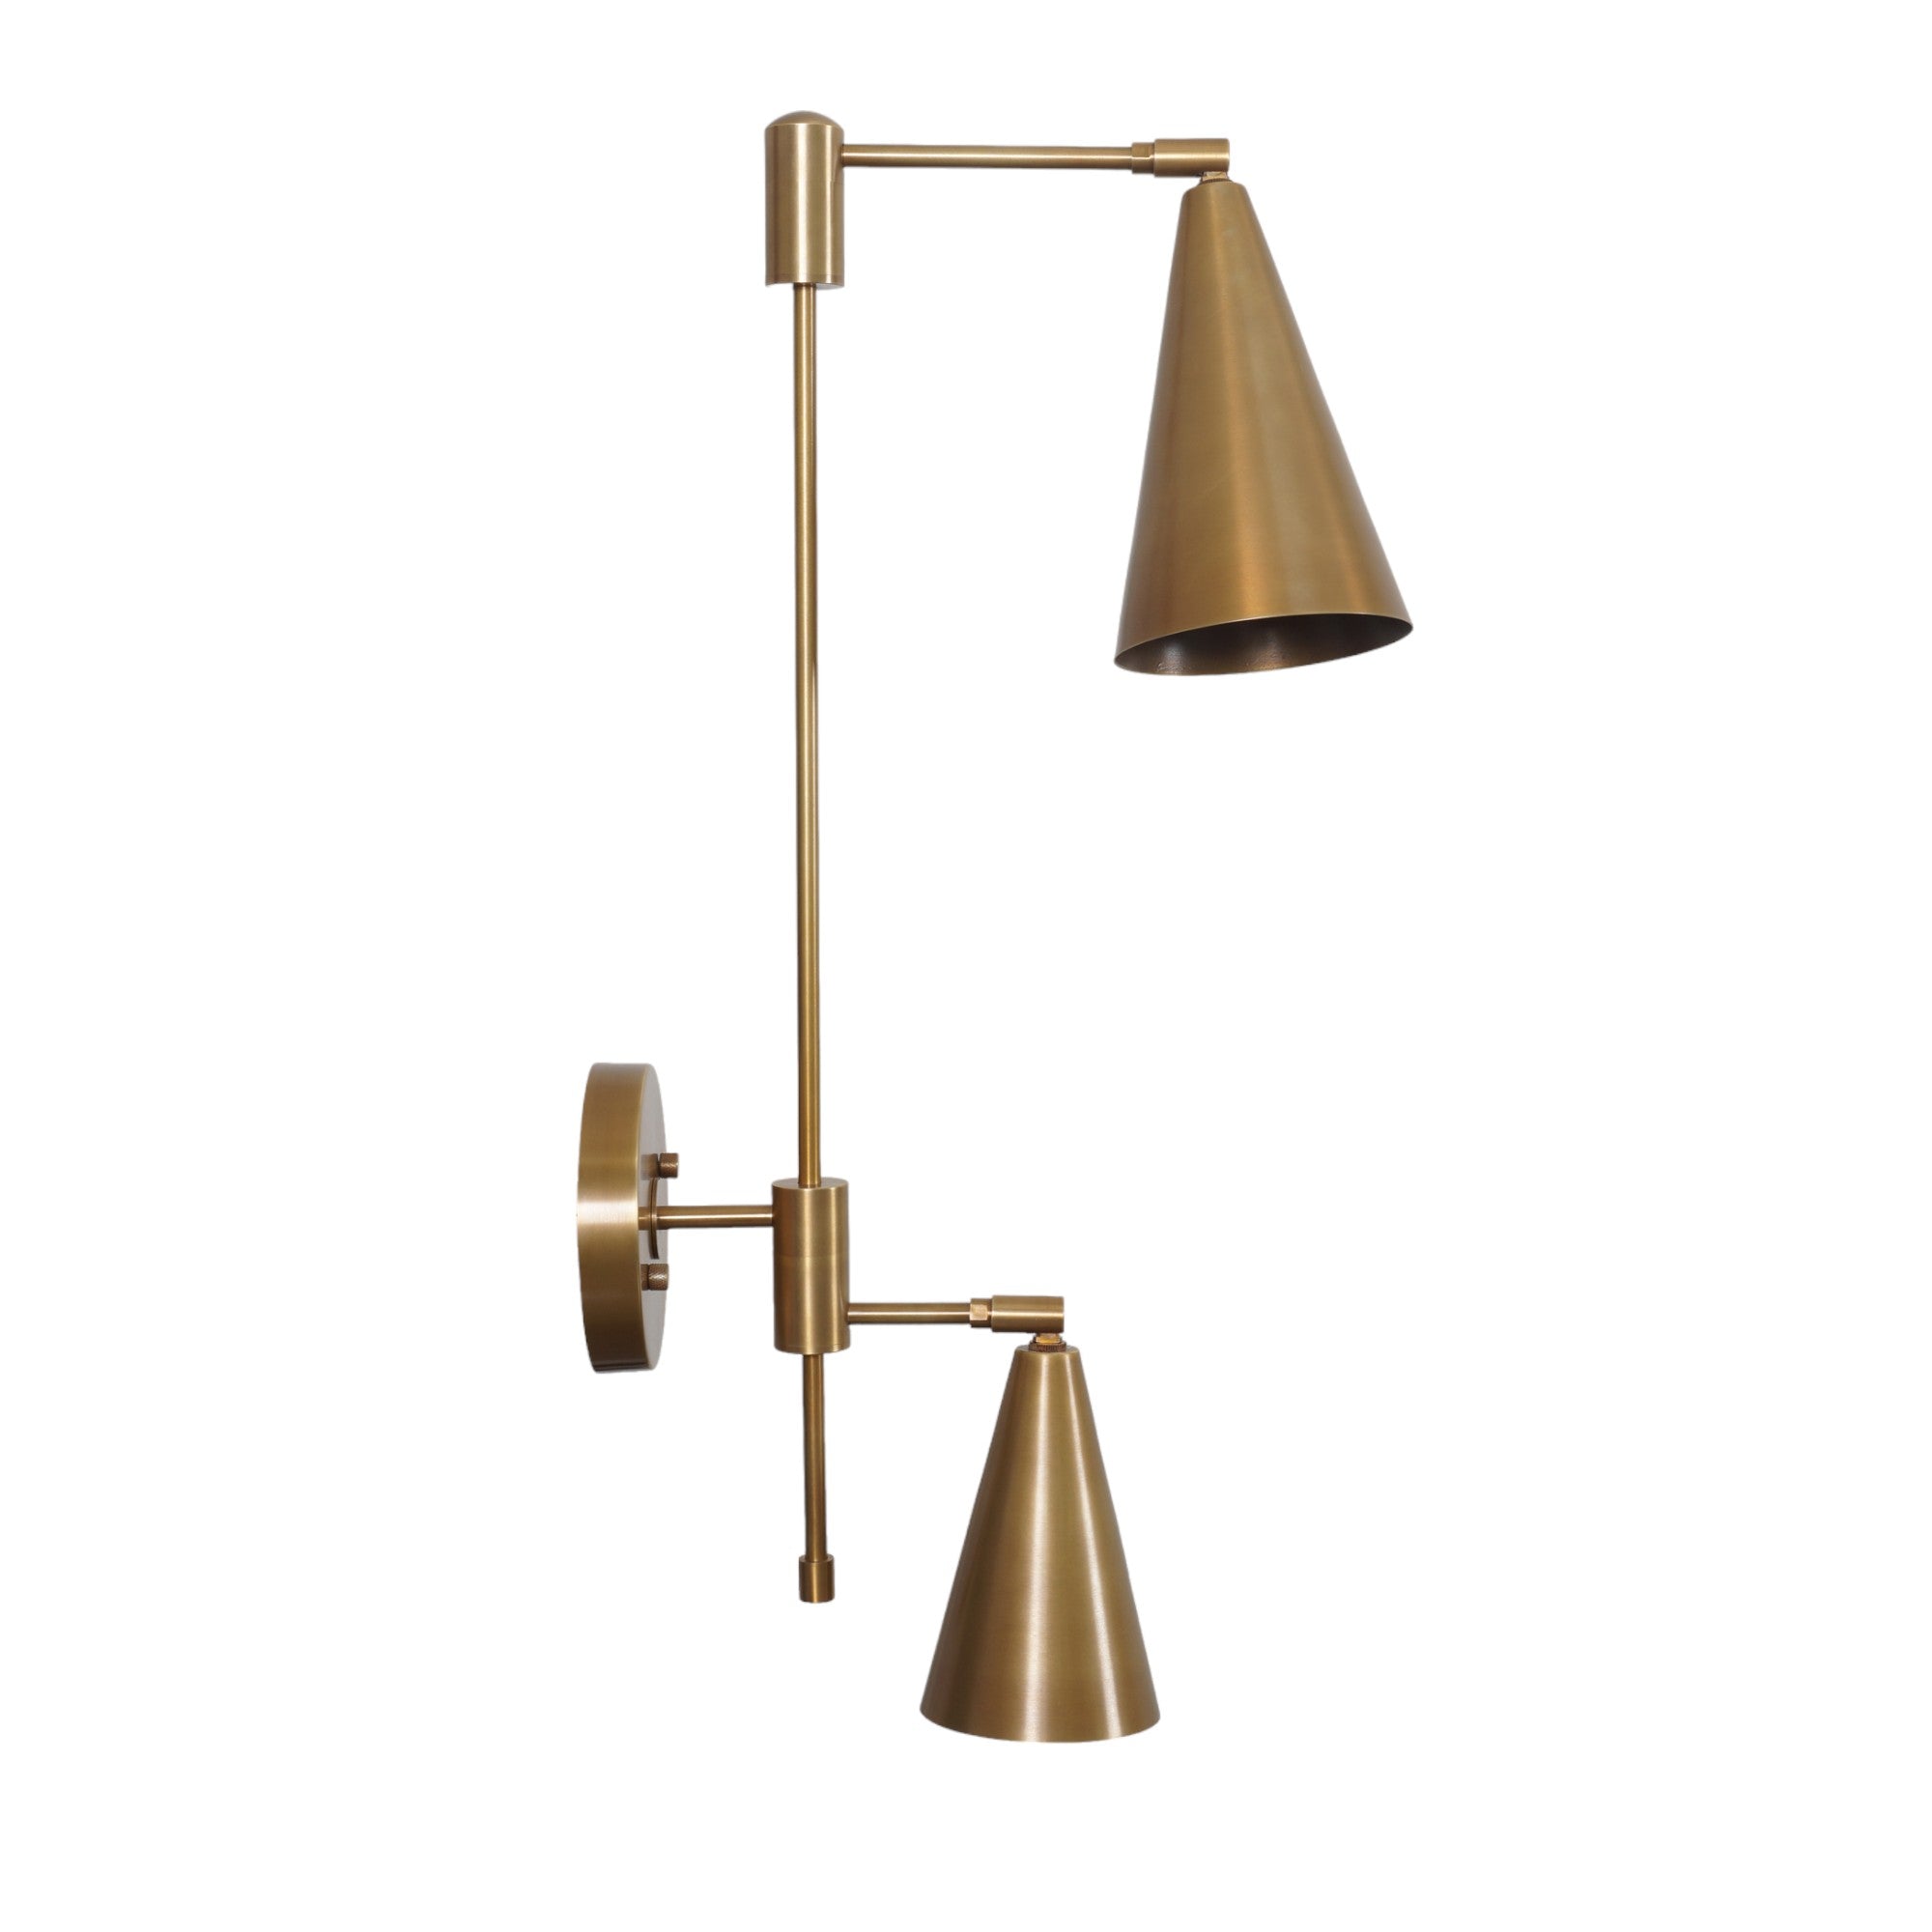 Double Shade Brass Articulated Arm Wall Lamp - Doozie Light Studio